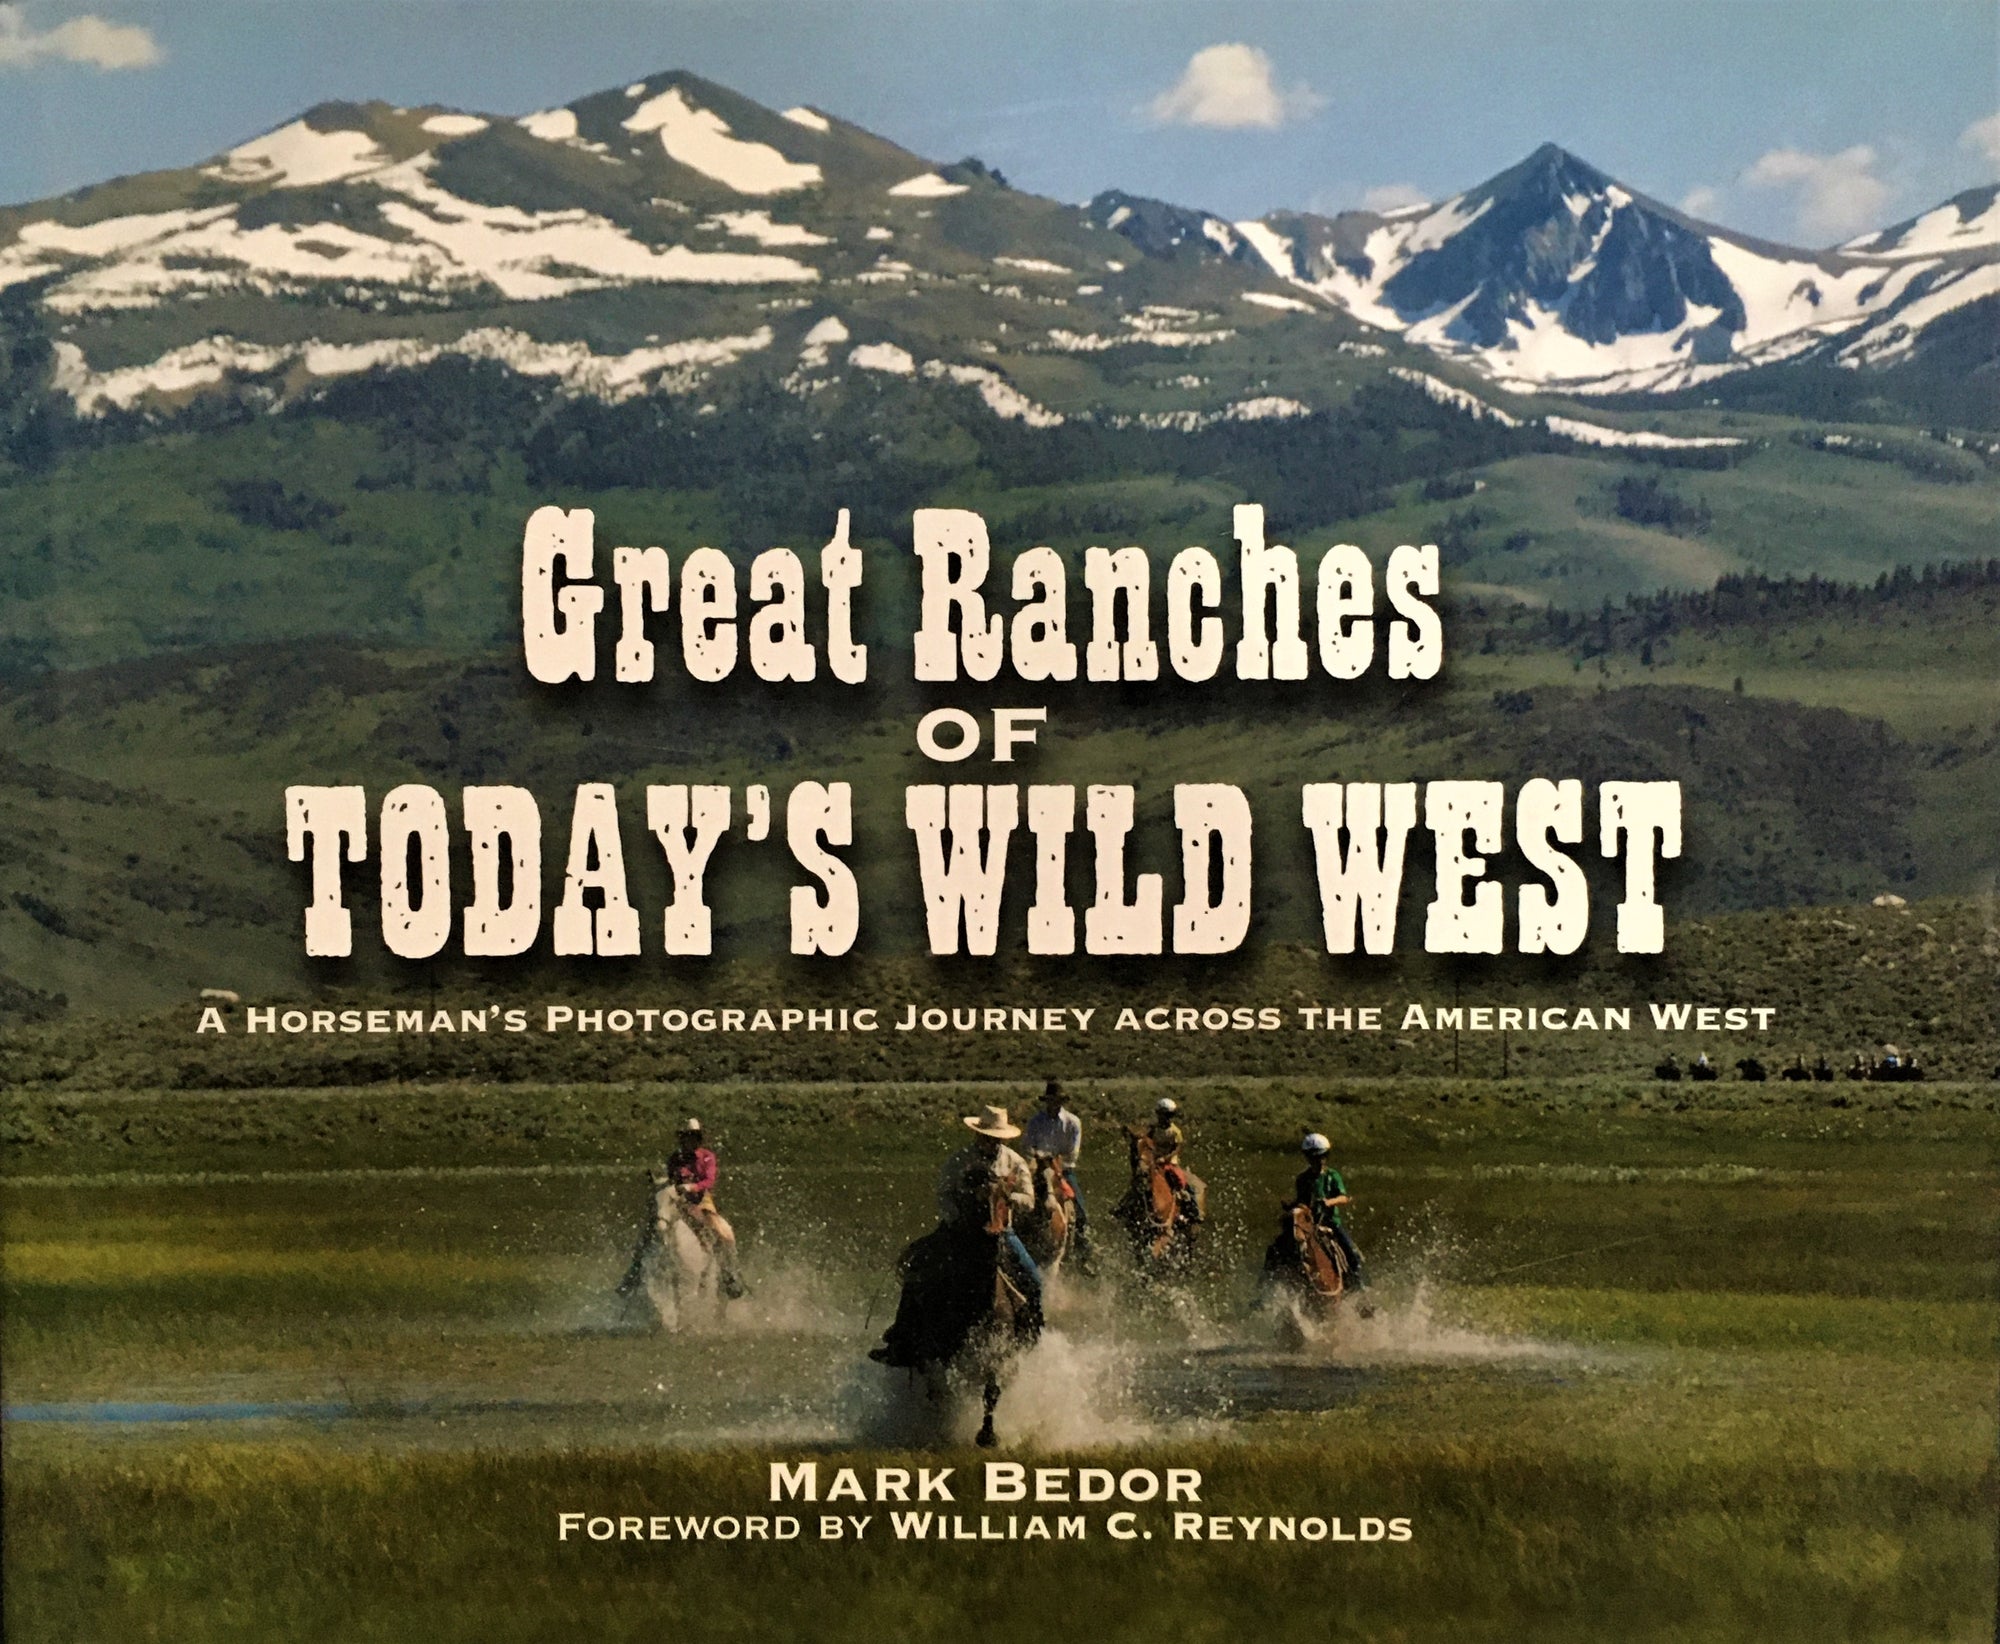 Great Ranches of Today's Wild West by Mark Bedor Book Cover